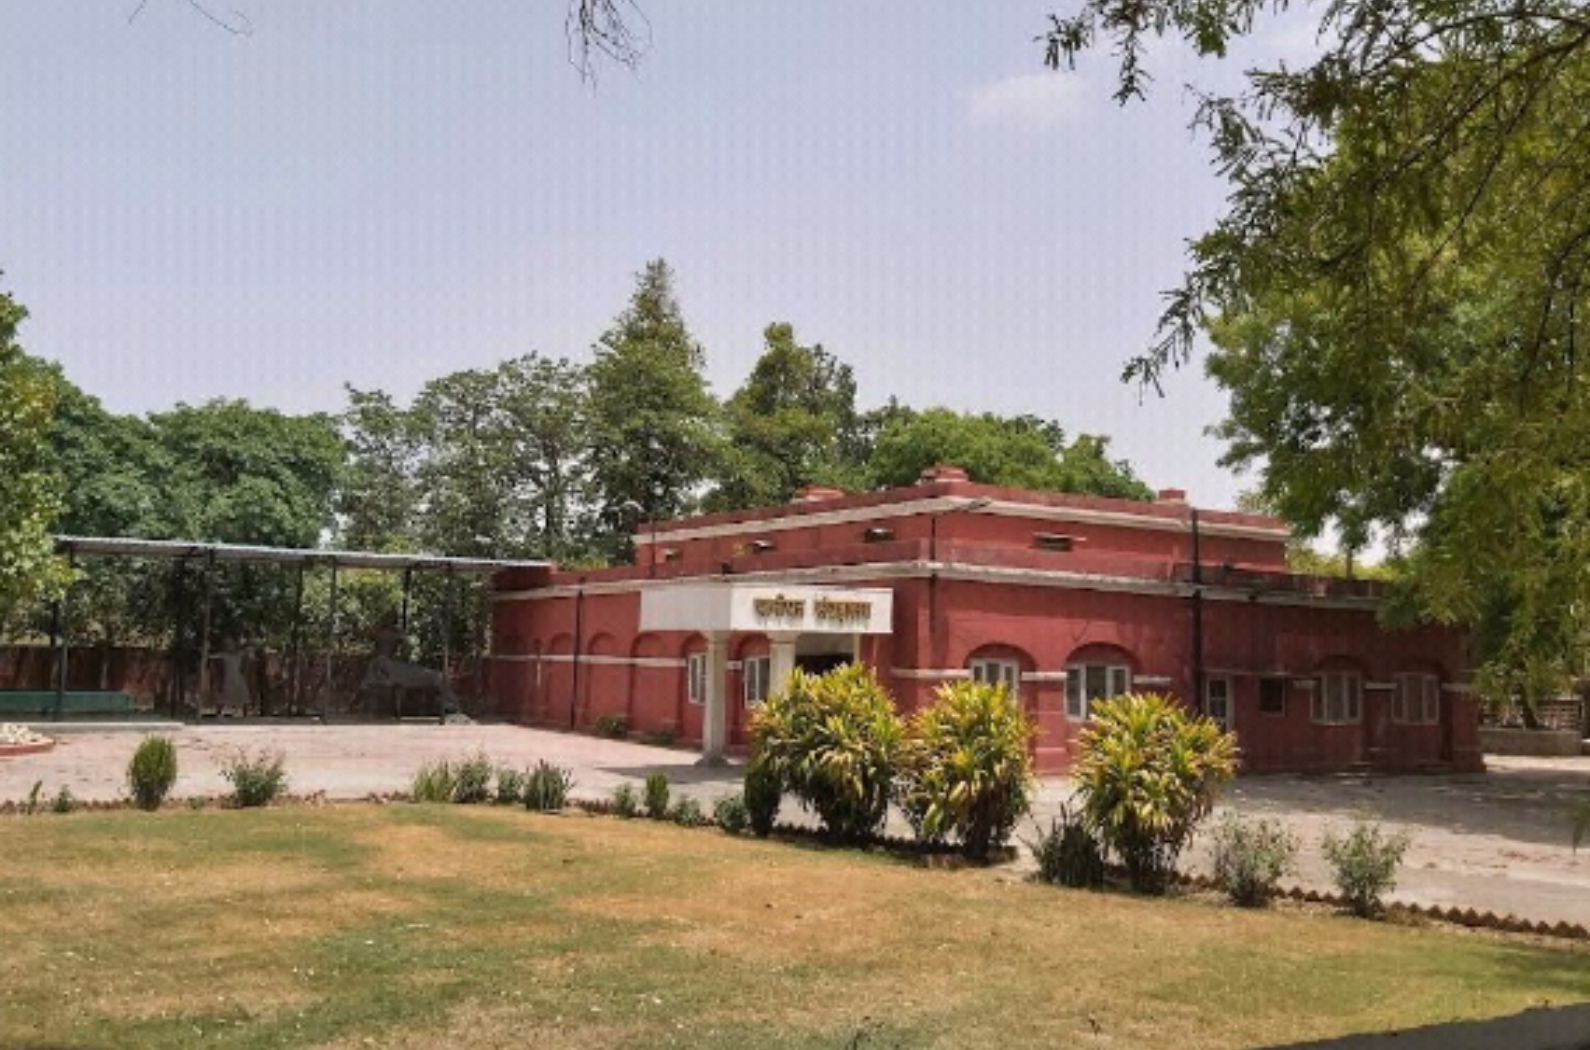 The view of this museum is amazing. Panipat Museum is one of the best places to see collections of historical items. Here you can also enhance your knowledge about this historic town